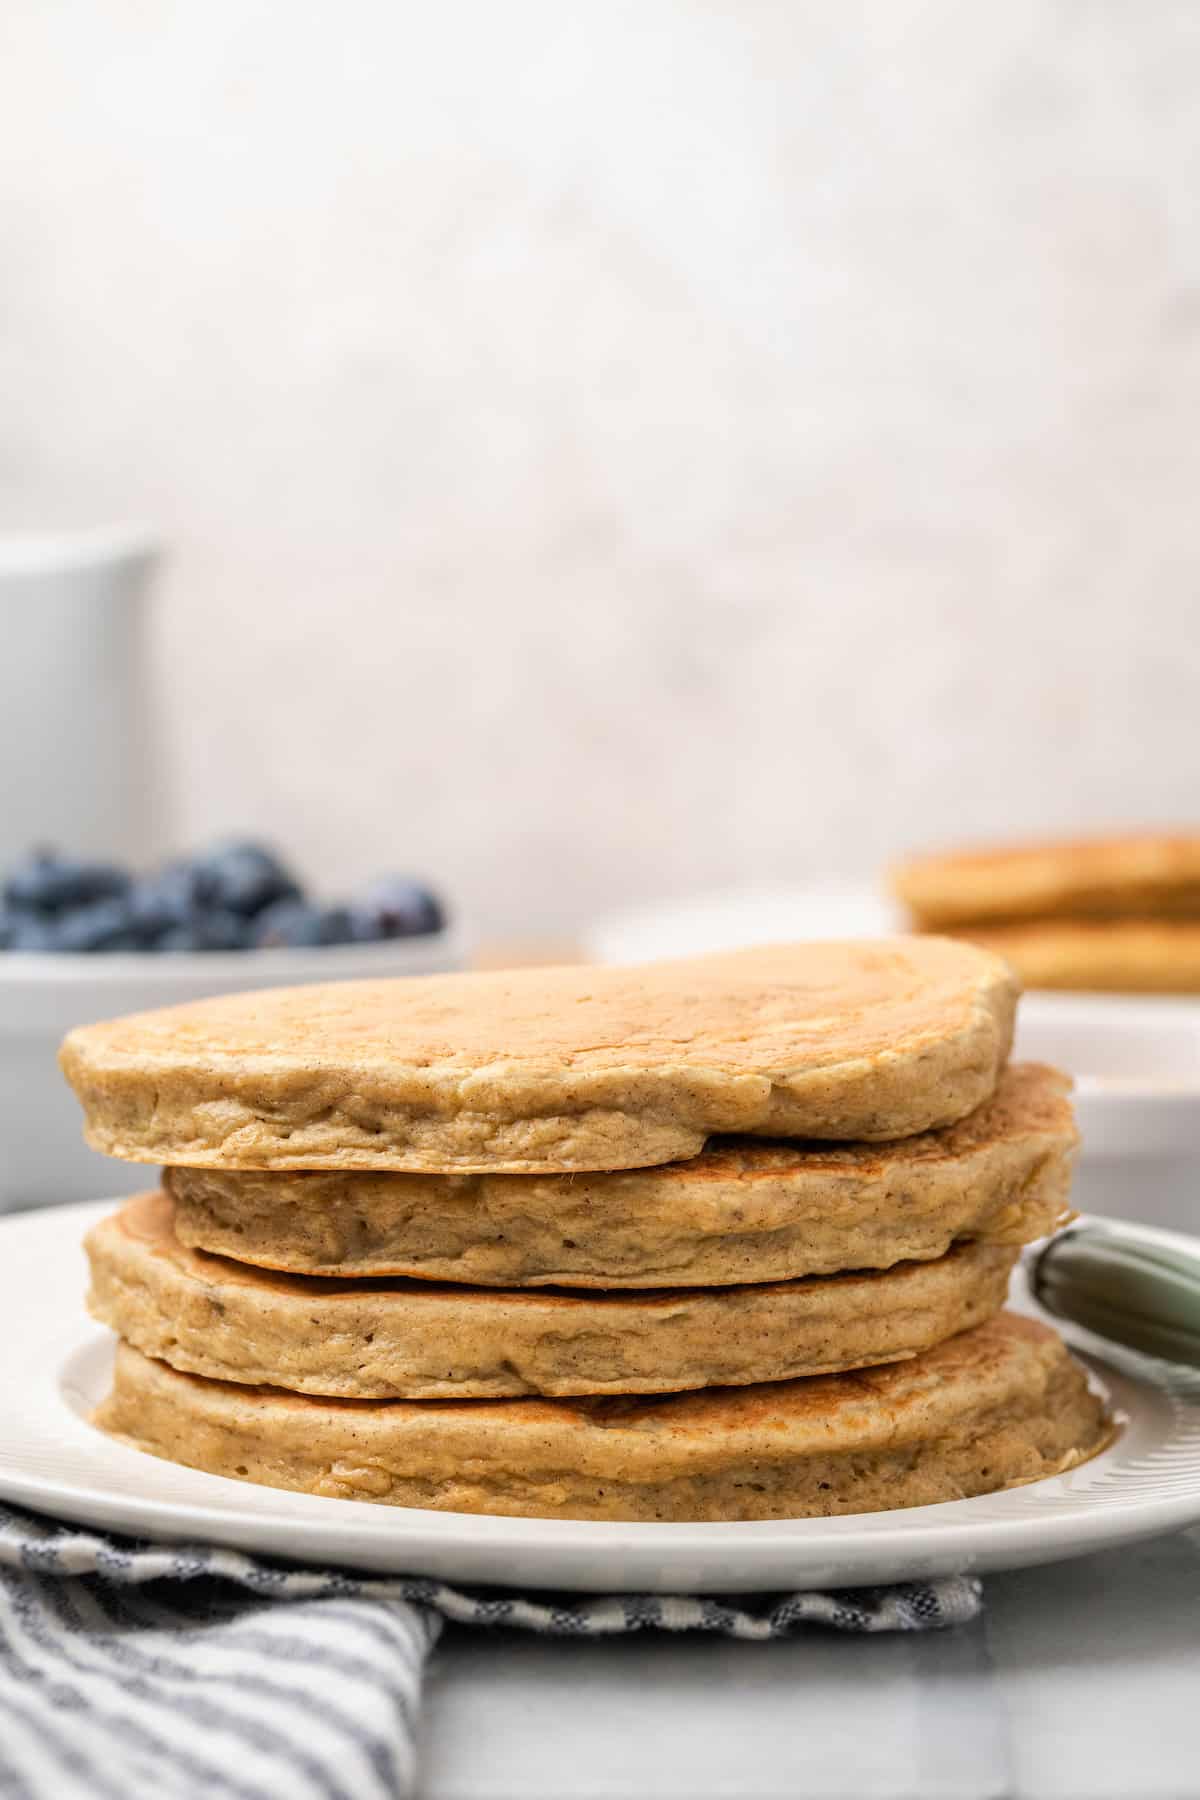 A stack of gluten-free pancakes on a plate.